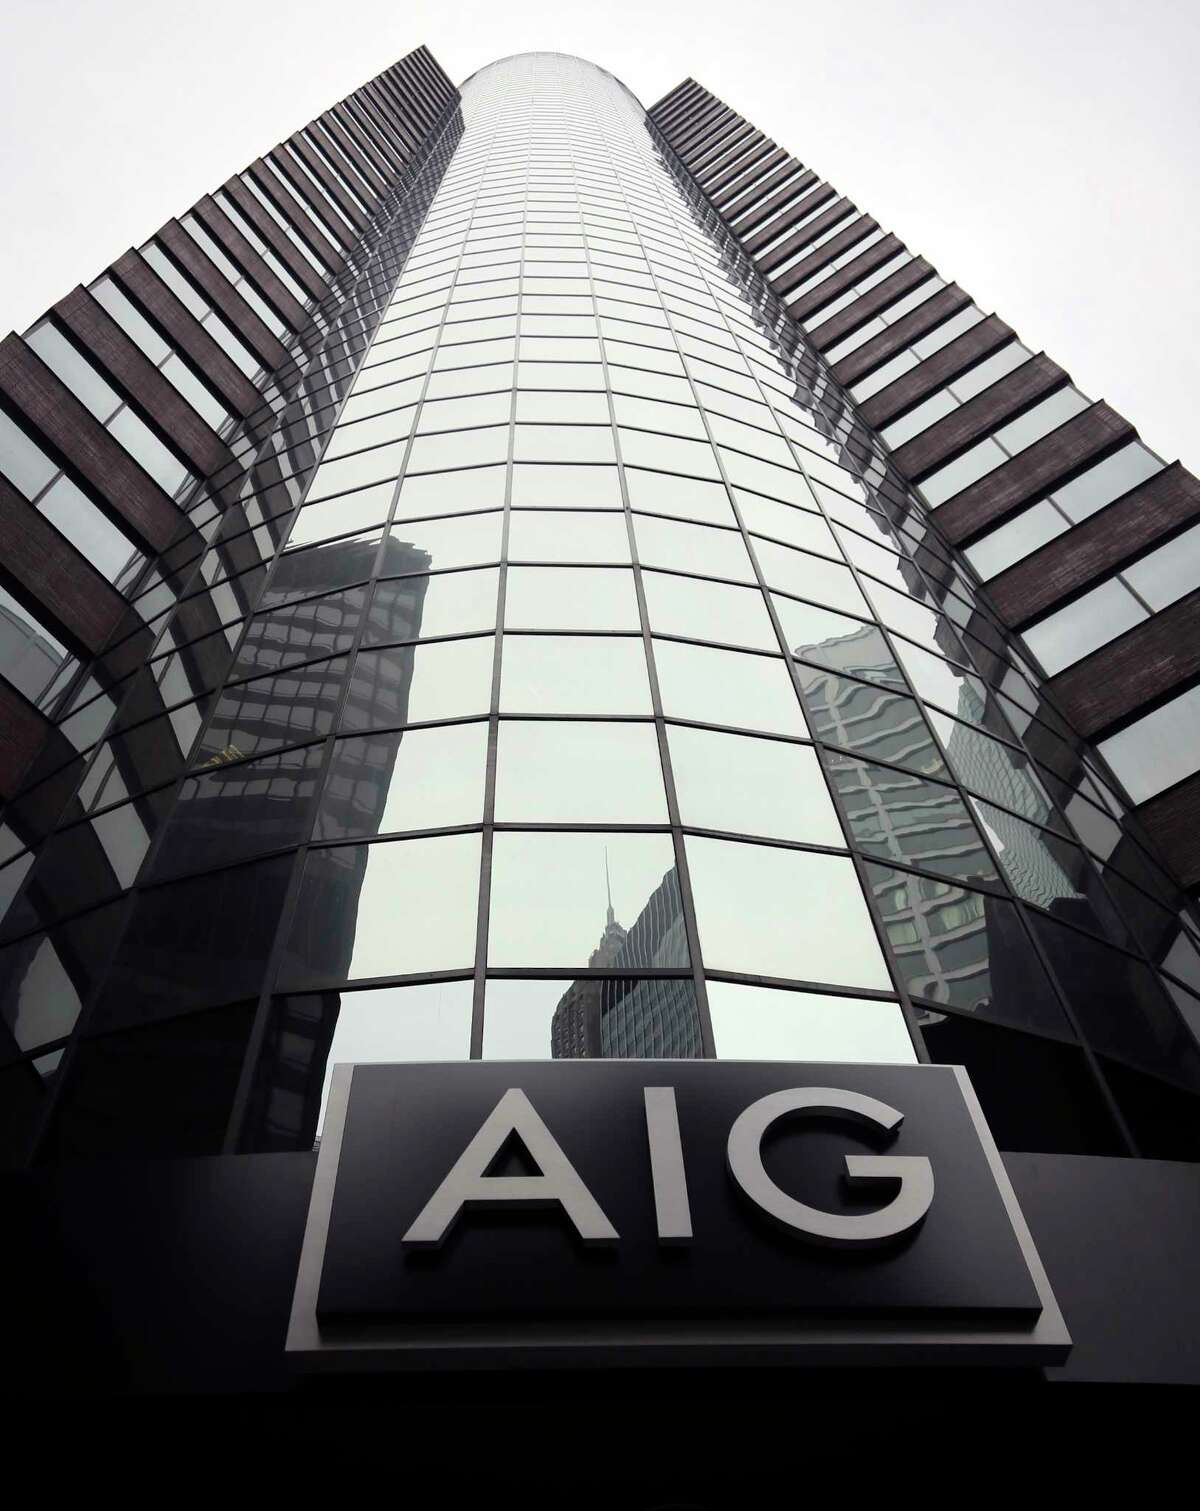 FILE - This Wednesday, Jan. 9, 2013, file photo shows the American International Group logo at the company's headquarters in New York. A federal appeals court has upheld as lawful the governmentÂ?’s bailout of AIG in the heat of the financial crisis. It overturned a lower-court decision favoring the insurance giantÂ?’s former CEO. The ruling Tuesday, May 9, 2017, by the U.S. Court of Appeals for the Federal Circuit said a company controlled by ex-AIG chief Maurice Greenberg didnÂ?’t have a legal right to pursue its claim against the government over the $85 billion bailout of the teetering AIG in September 2008. (AP Photo/Bebeto Matthews, File)